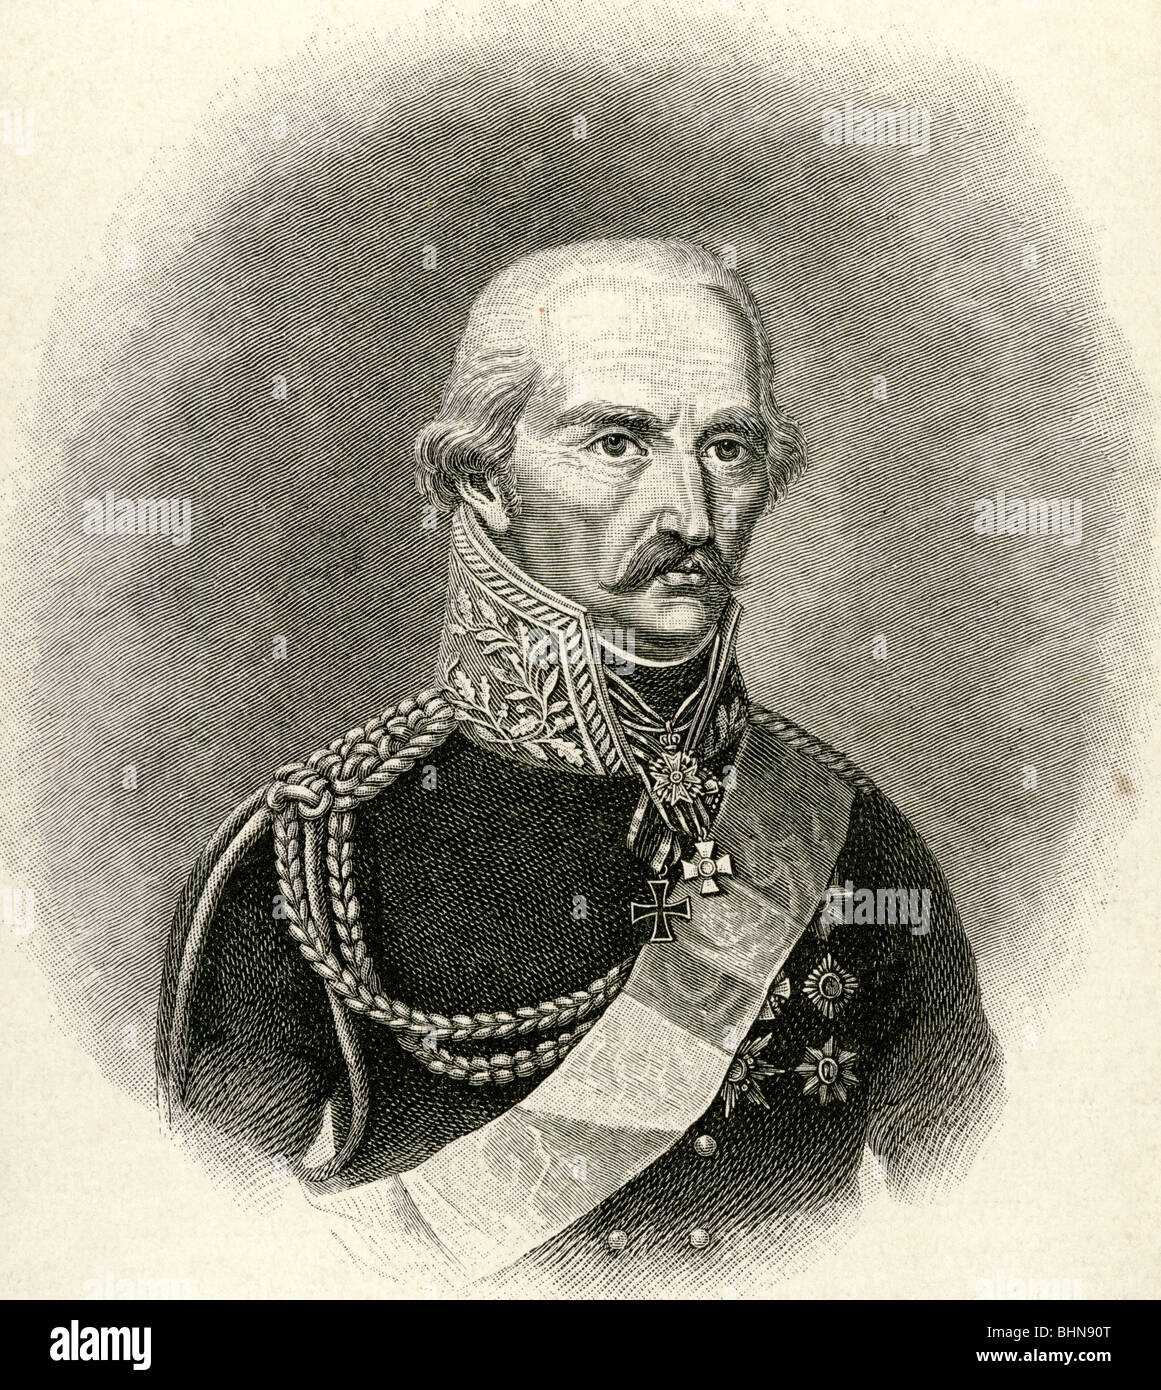 Bluecher, Gebhard Leberecht von, 16. 12.1742 - 12.9.1819, Prussian general, portrait, lithograph by F. C. Groeger after painting by Fleischmann, 1814, , Artist's Copyright has not to be cleared Stock Photo